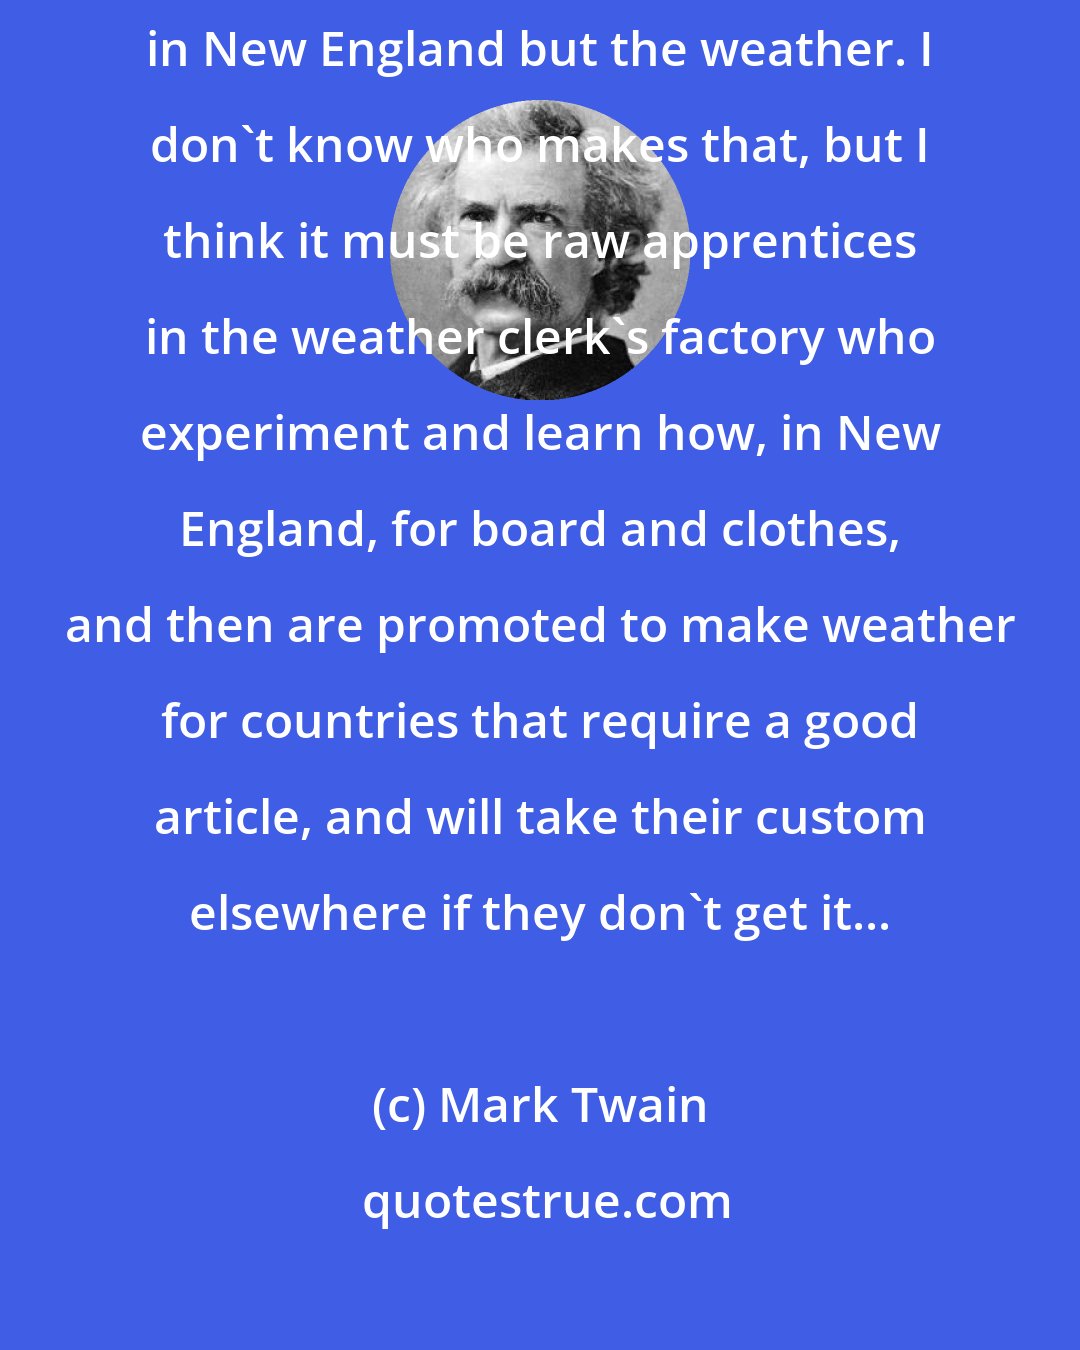 Mark Twain: I reverently believe that the Maker who made us all makes everything in New England but the weather. I don't know who makes that, but I think it must be raw apprentices in the weather clerk's factory who experiment and learn how, in New England, for board and clothes, and then are promoted to make weather for countries that require a good article, and will take their custom elsewhere if they don't get it...